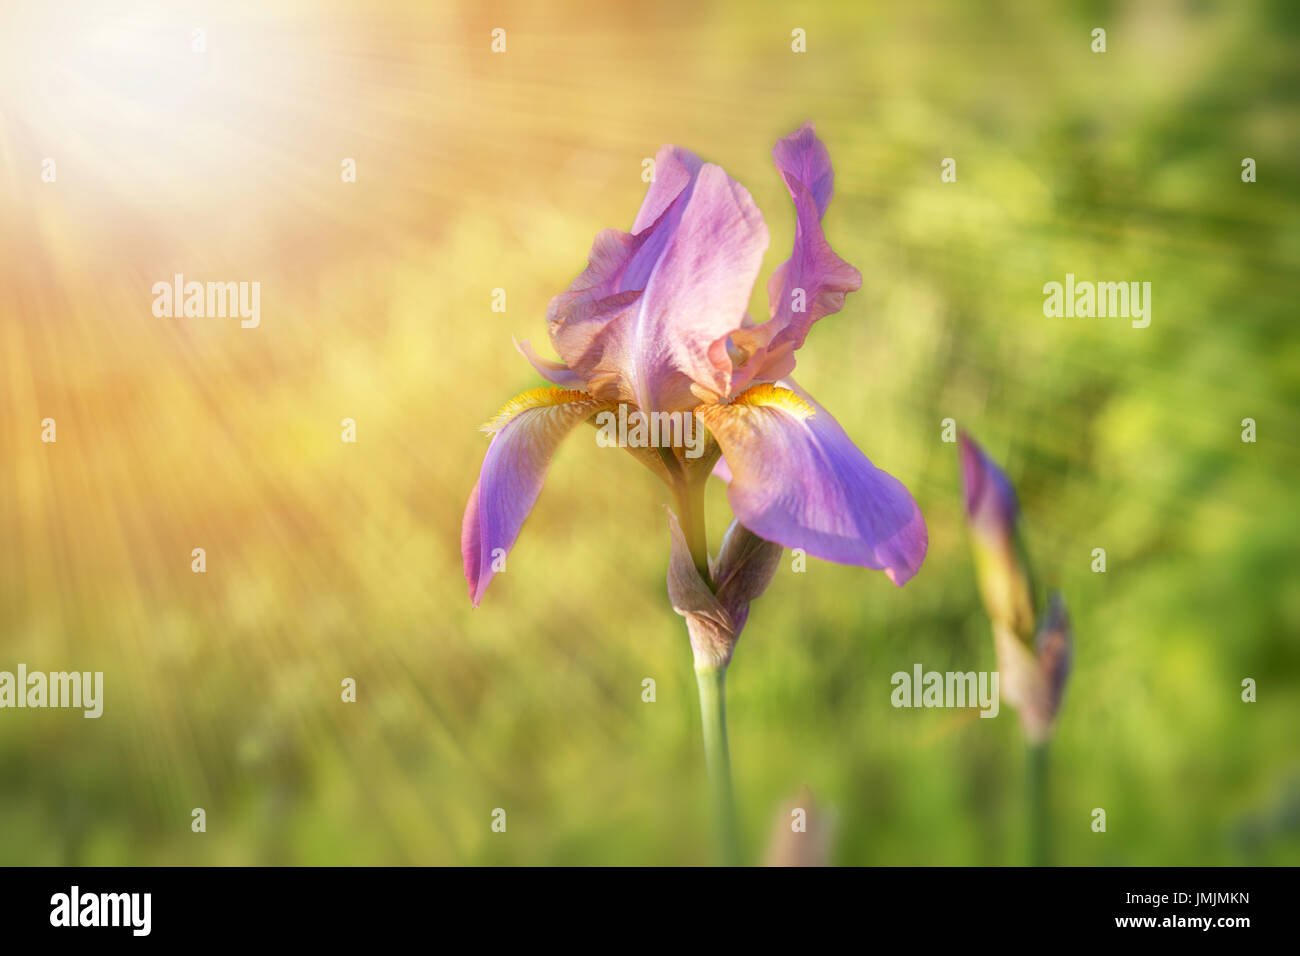 Light violet iris under sunlight at the middle of summer or spring day landscape. Natural view of flower blooming in the garden with green grass as a background. Stock Photo